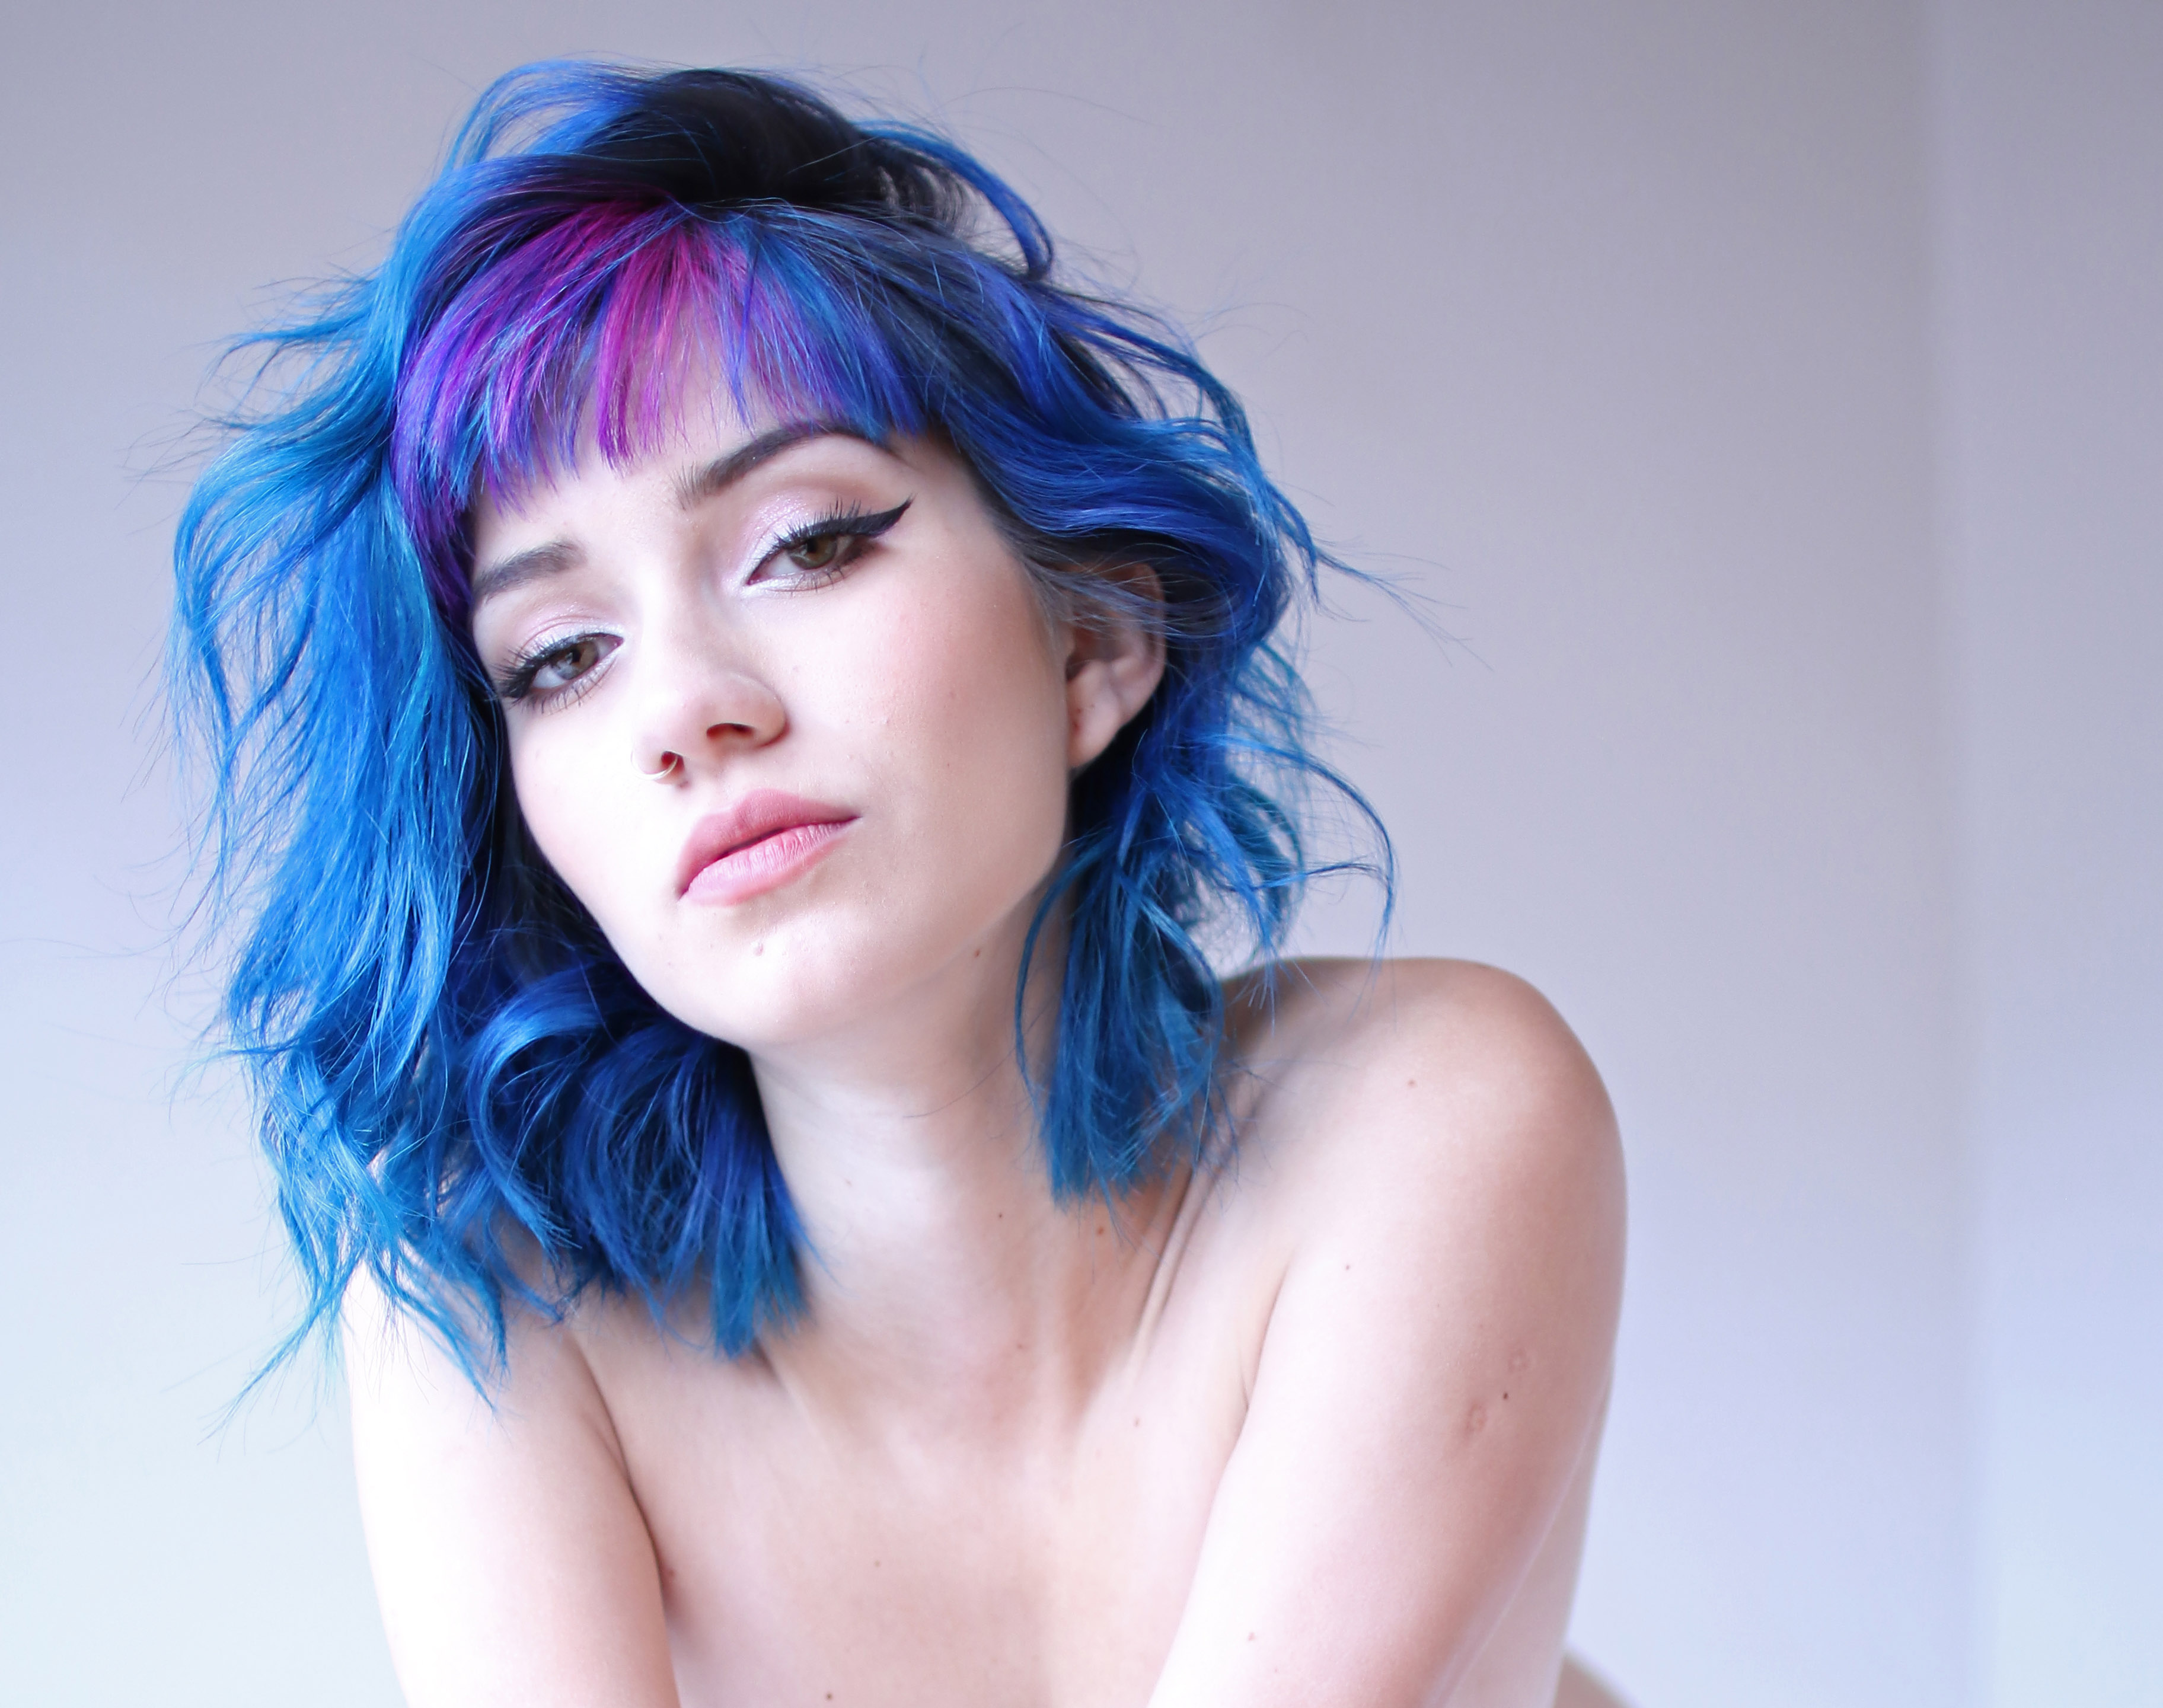 Model Blue Hair Nose Rings Pierced Nose Bare Shoulders Dyed Hair 3648x2881